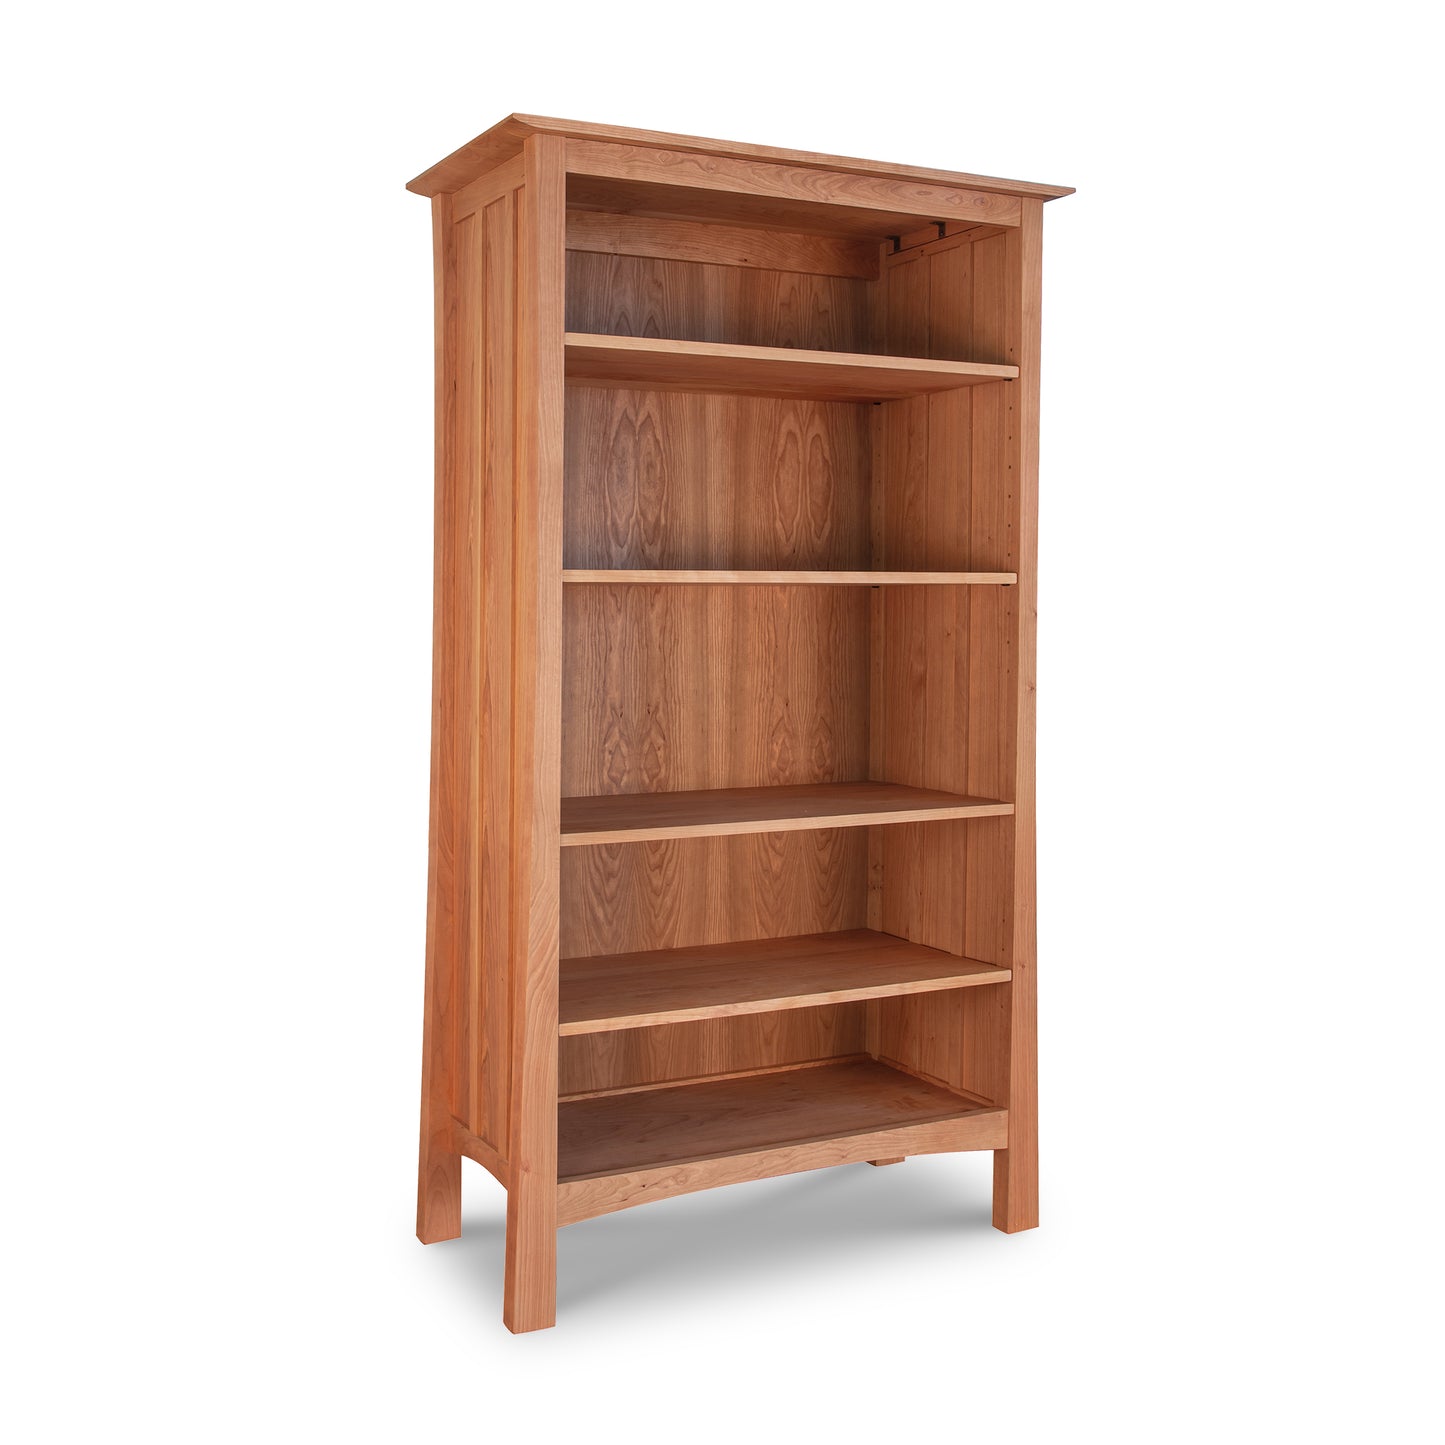 A Contemporary Craftsman Custom Bookcase by Vermont Furniture Designs on a white background.